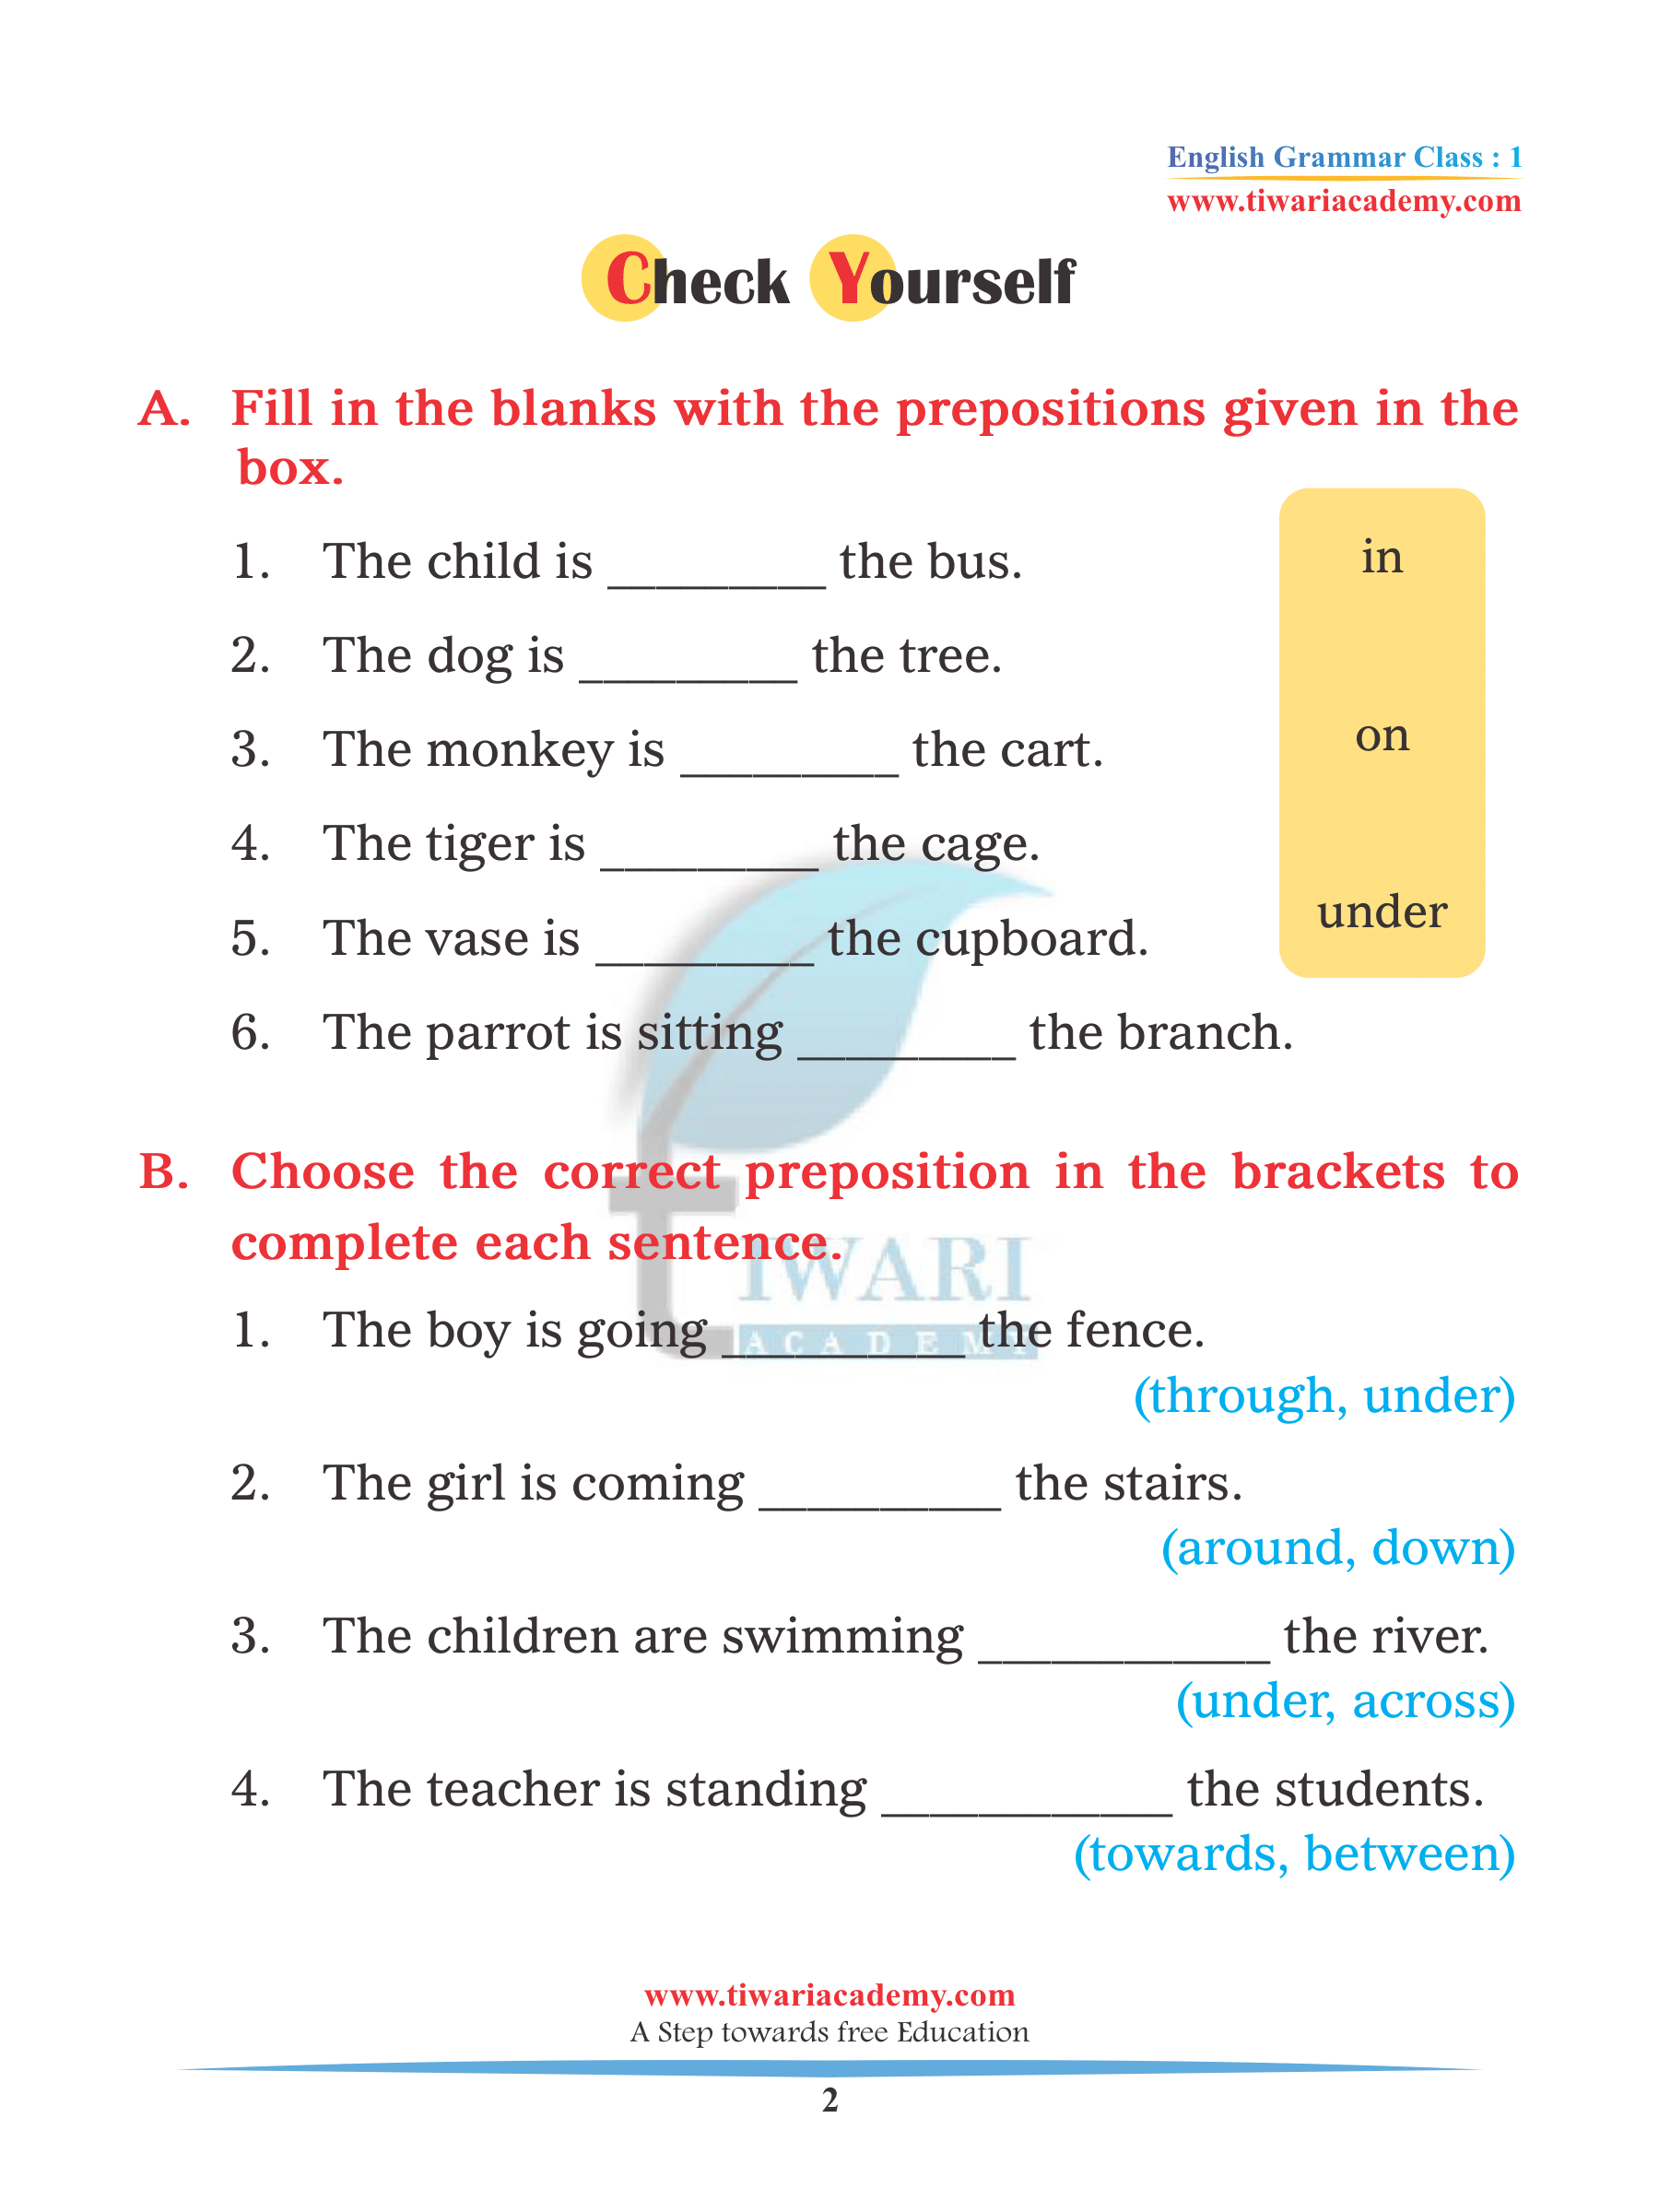 Assignment of Prepositions for grade 1